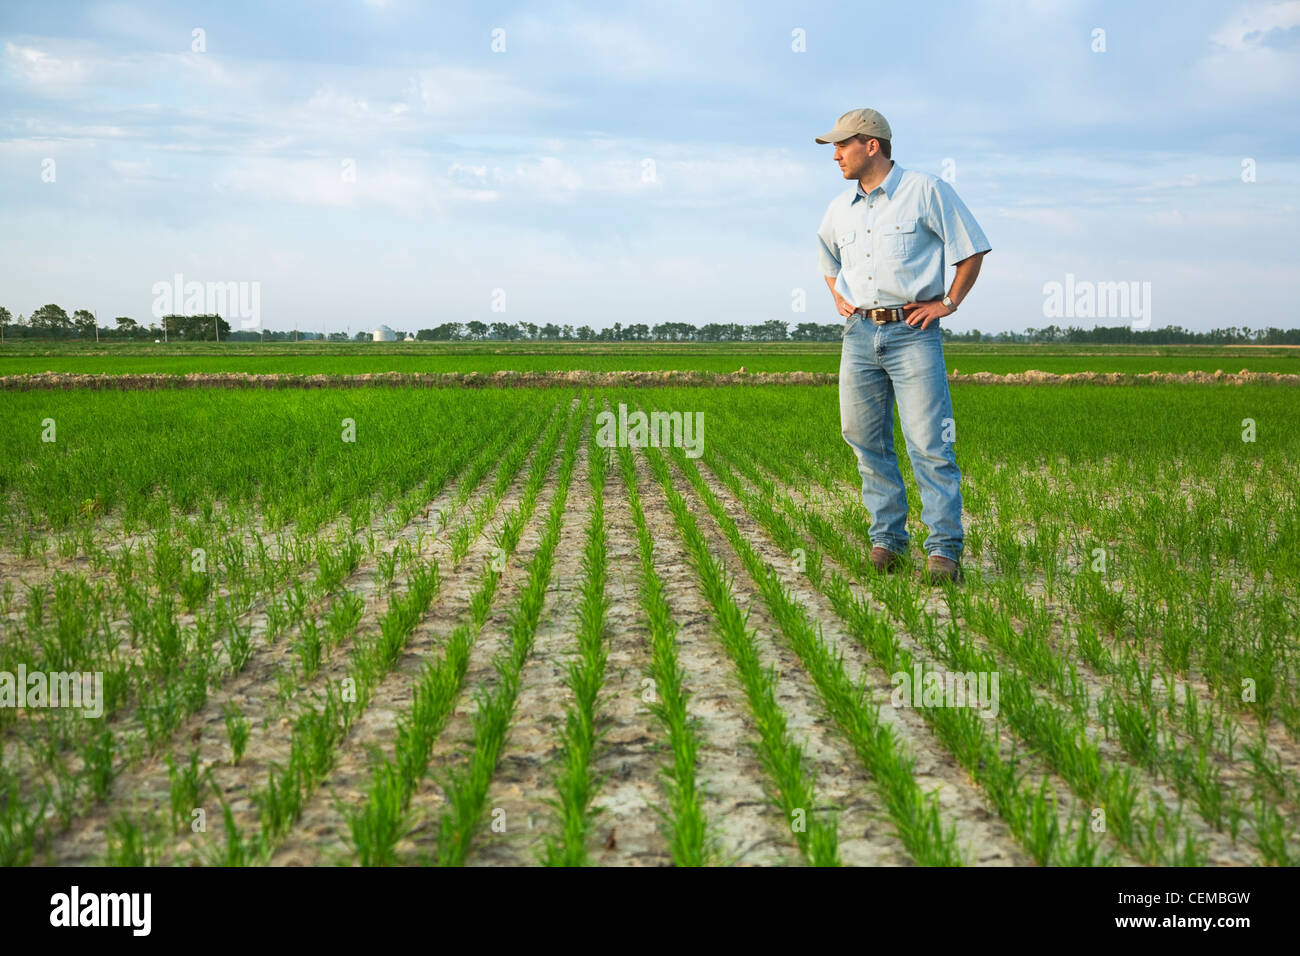 Agriculture - A farmer (grower) standing in his field inspecting the progress of his early growth rice crop / Arkansas, USA. Stock Photo